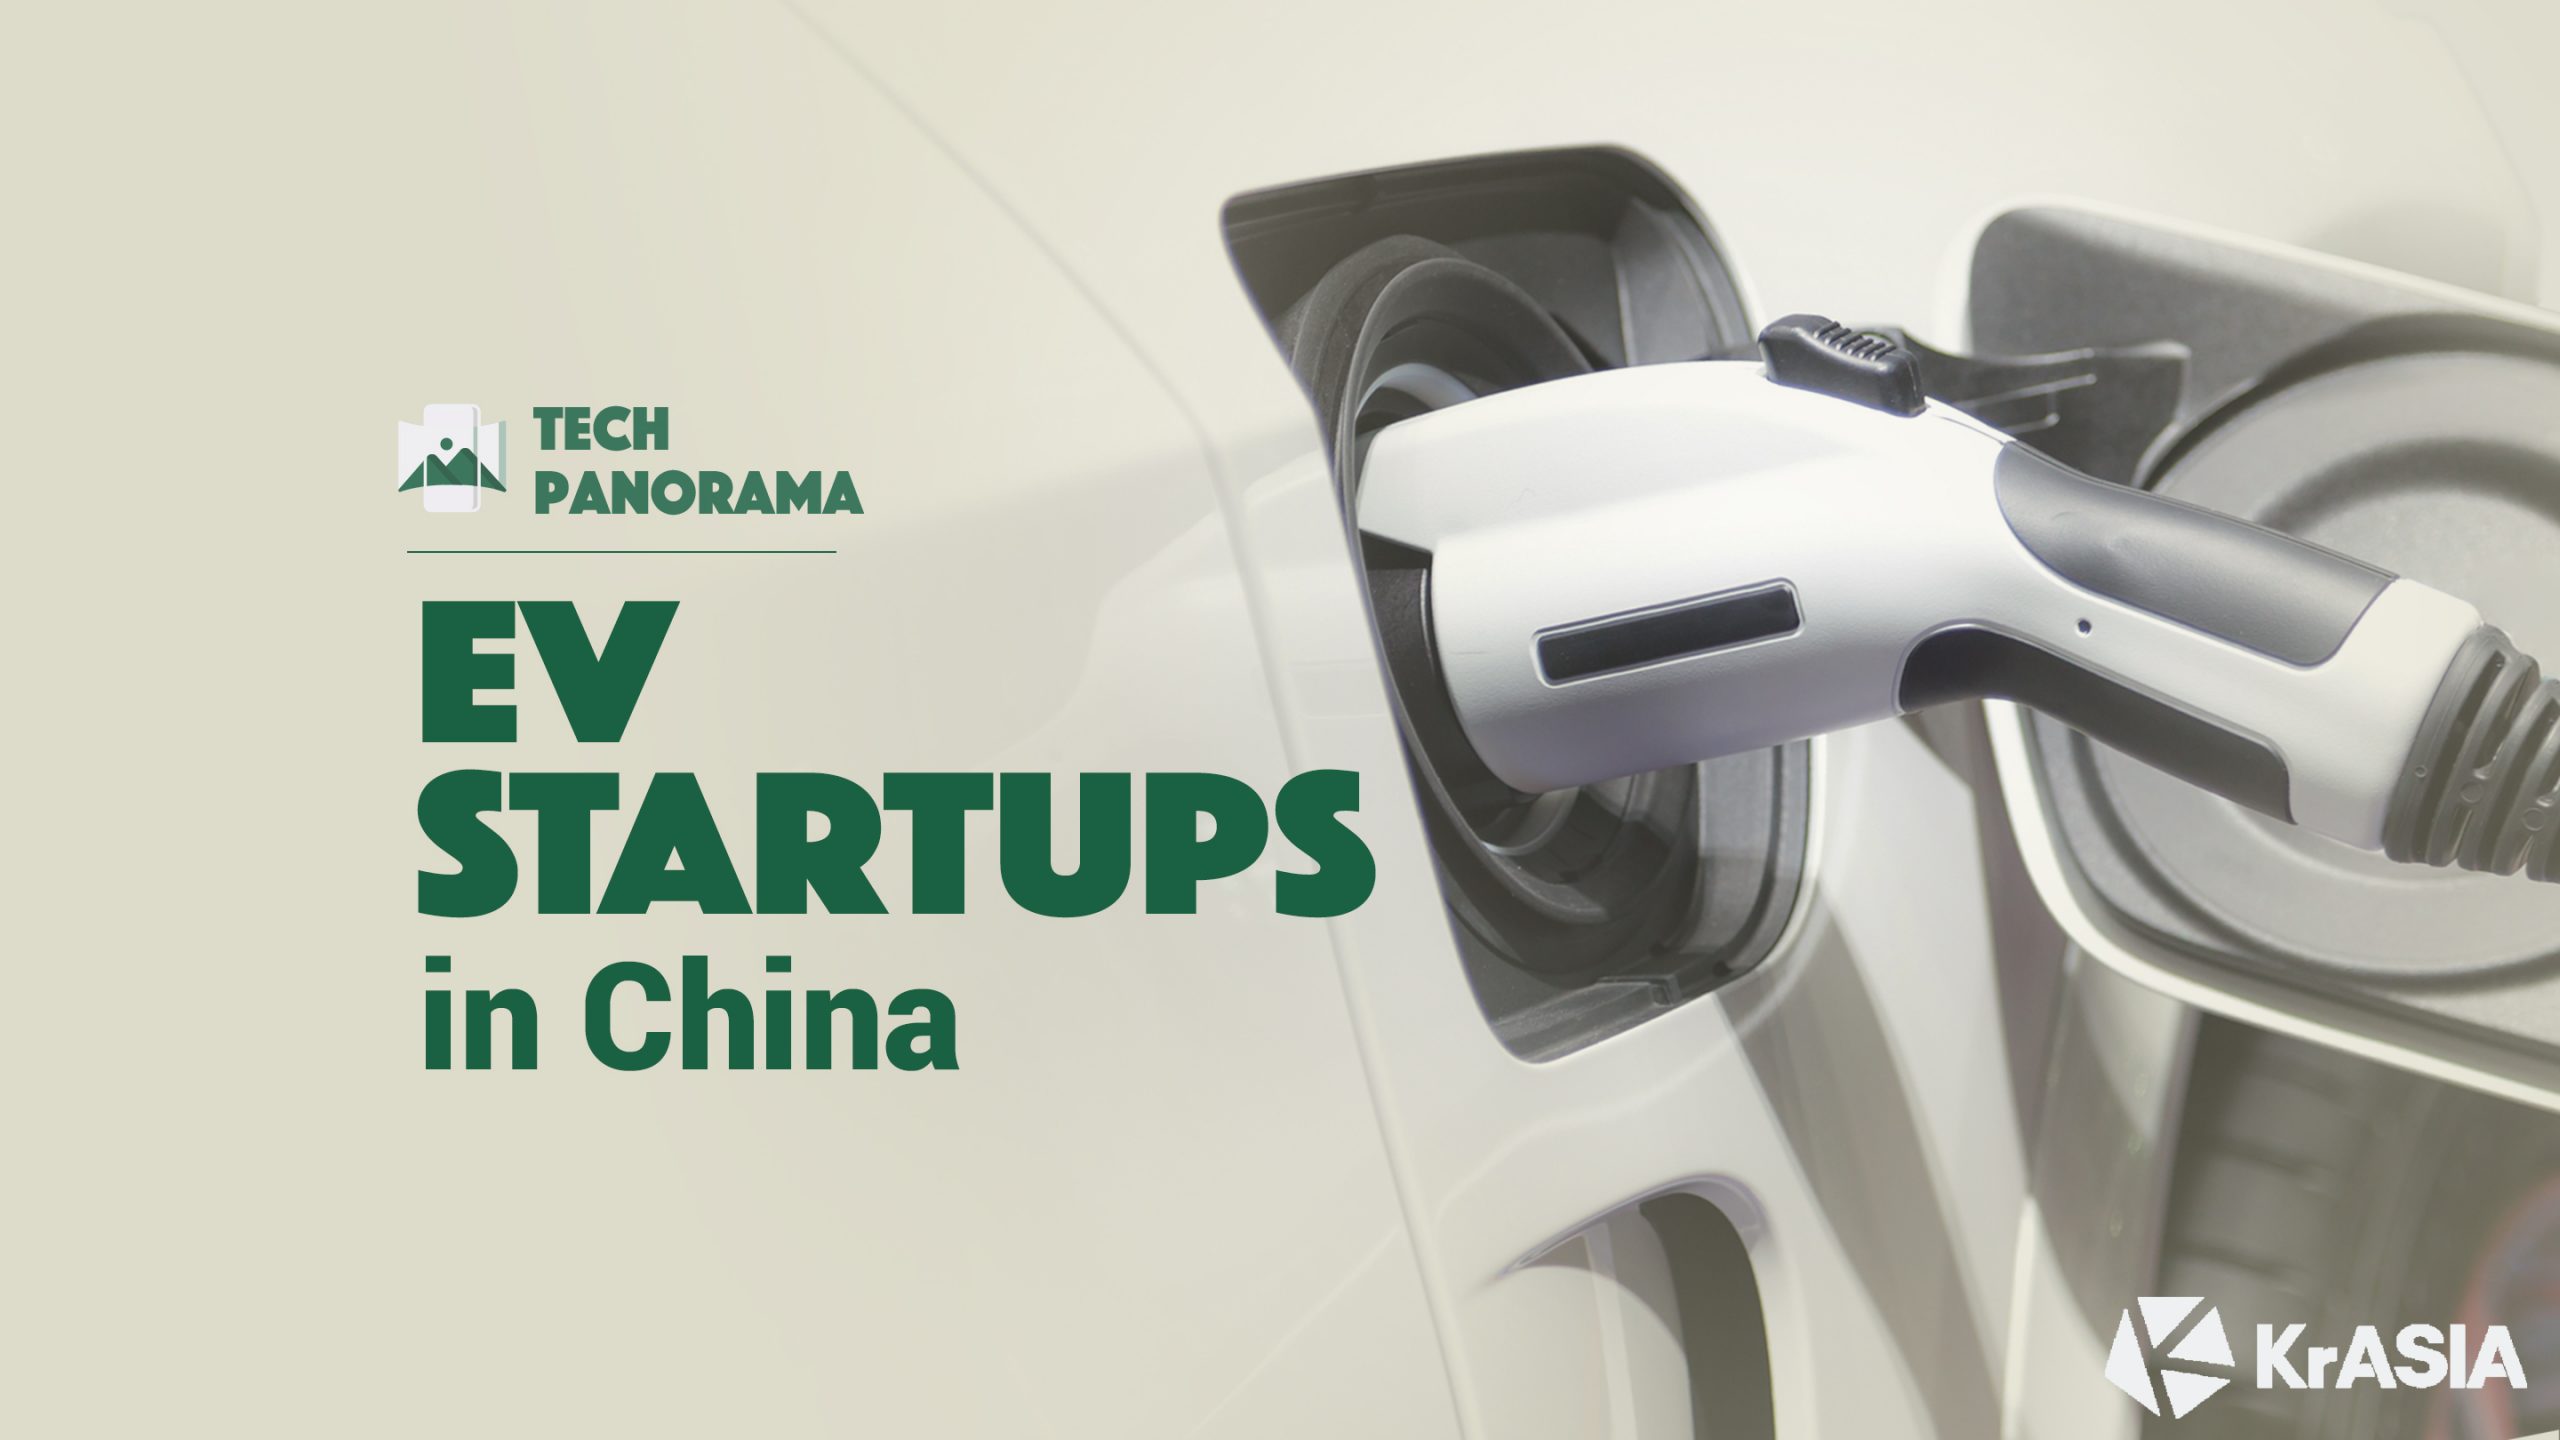 TECH PANO | Capital-fueled “Teslas” of China are yet to own the roads